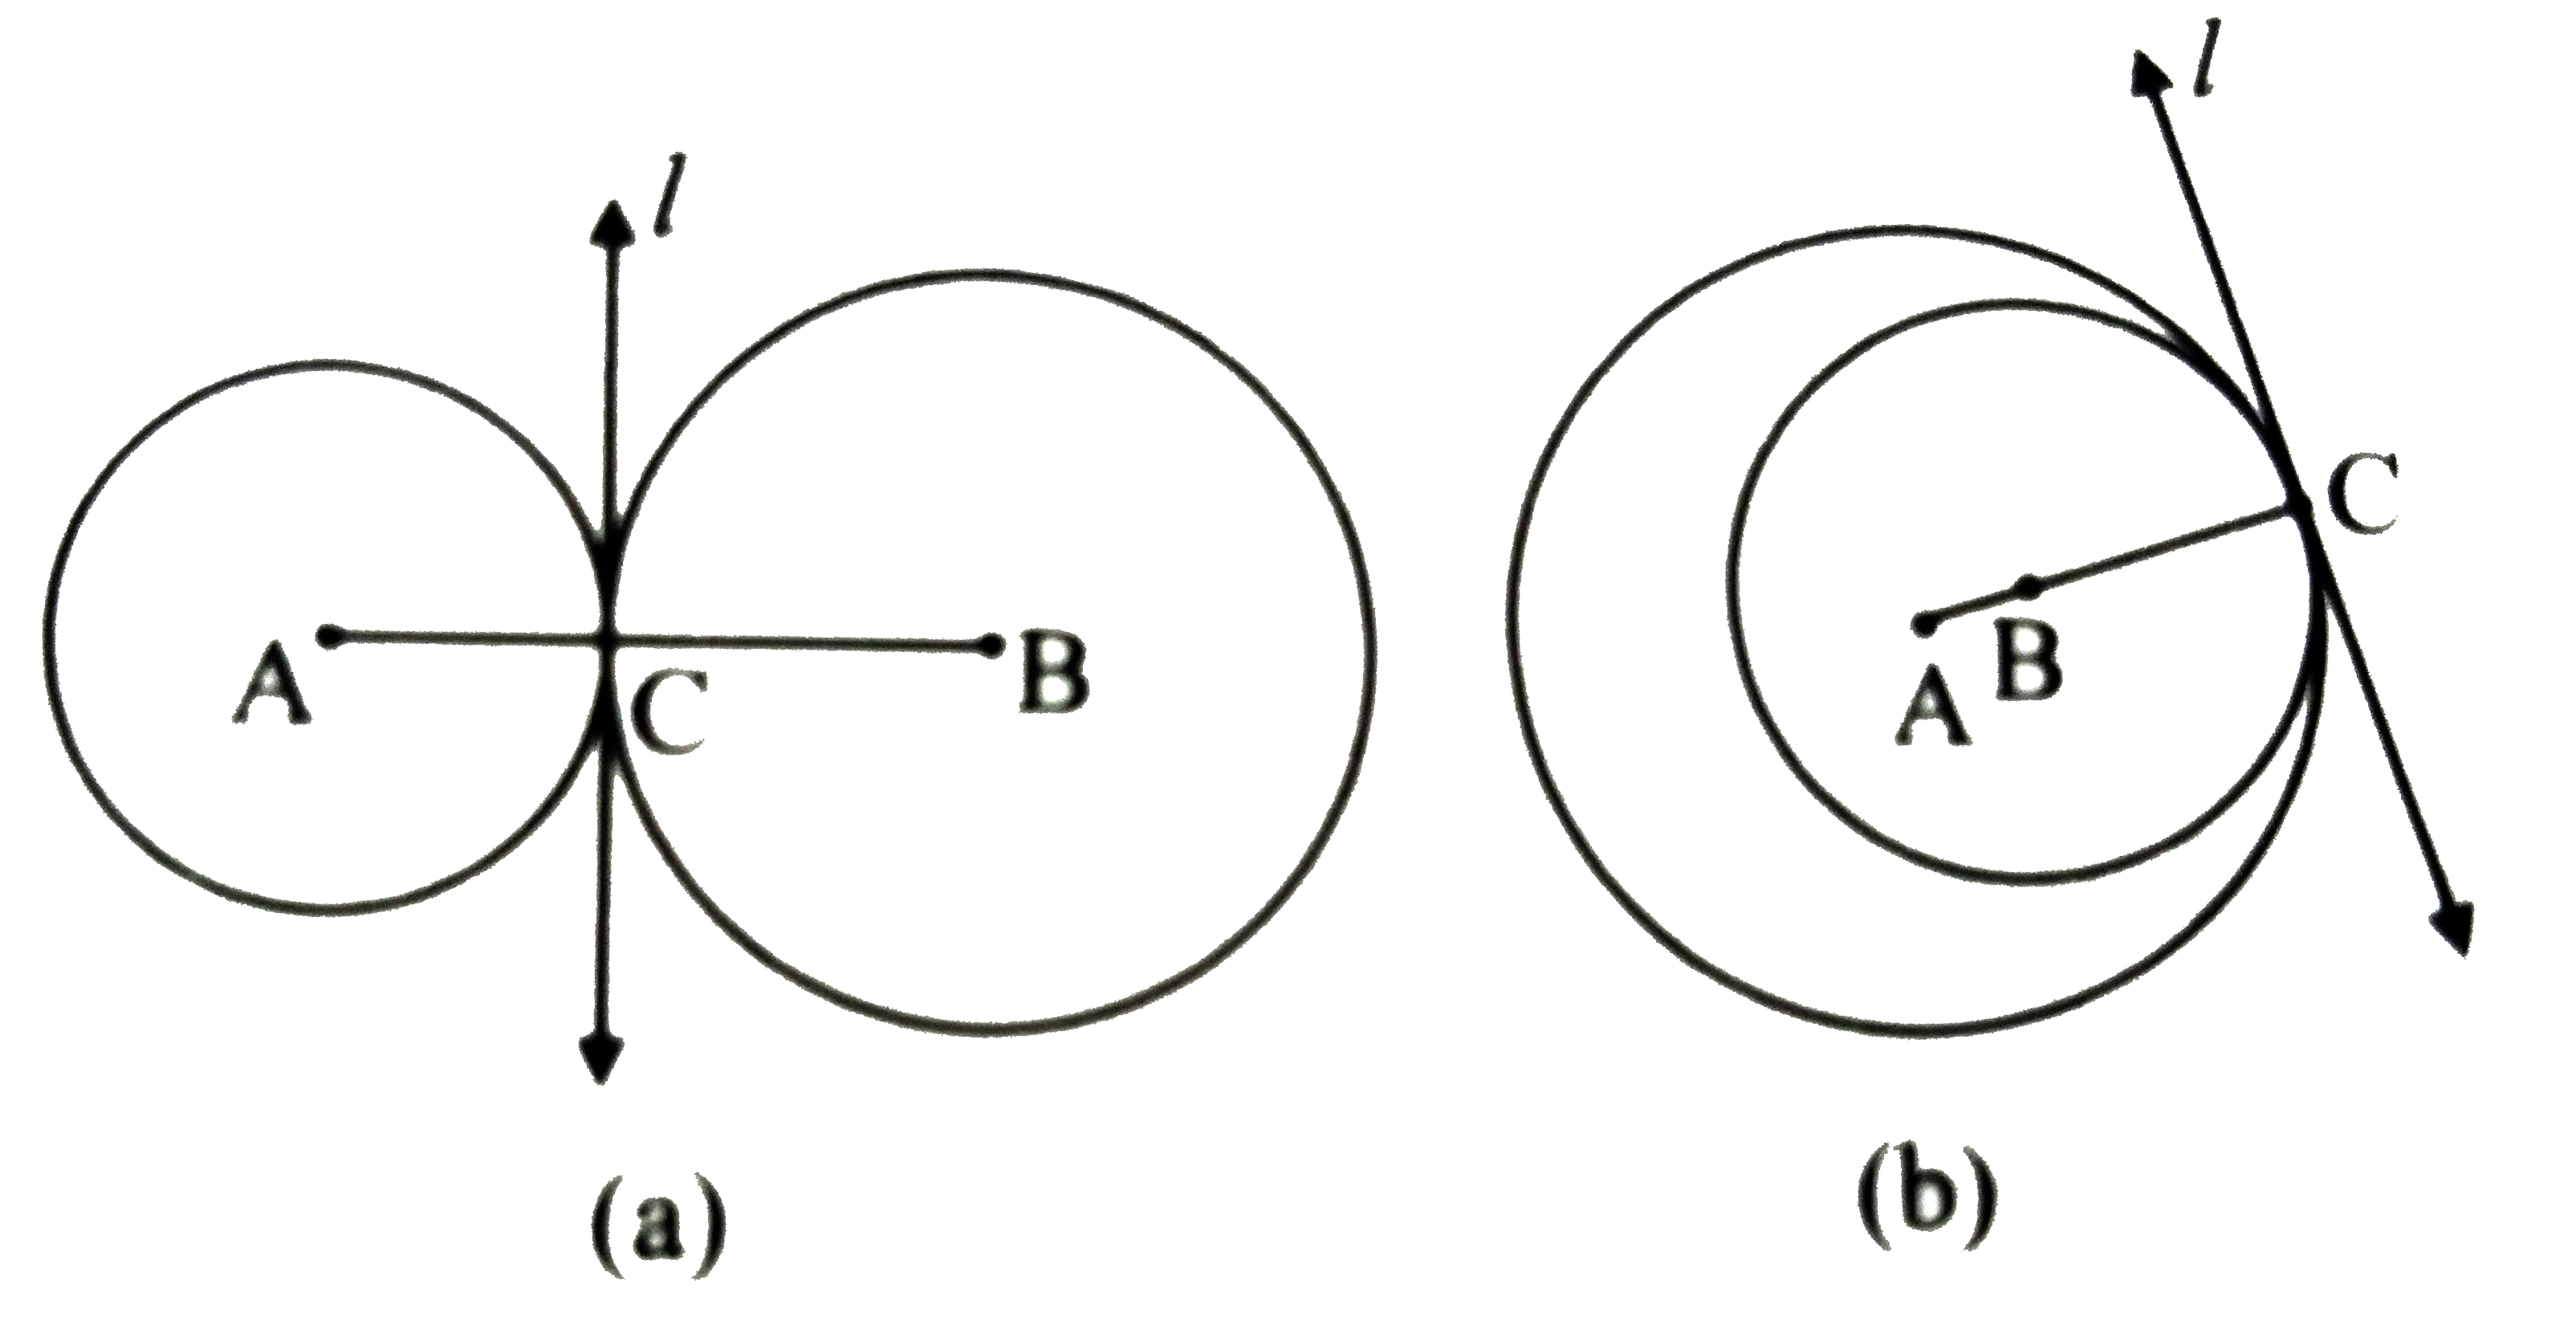 In the given figure ,  (i) the radii of the circles with centres A and B are 3cm and 4cm respectively. (ii) the radii of the circles with centres A and B are 4cm and 3cm respectively. Find  (i) d(A,B) in figure (a)   (ii) d(A,B) in figure (b)